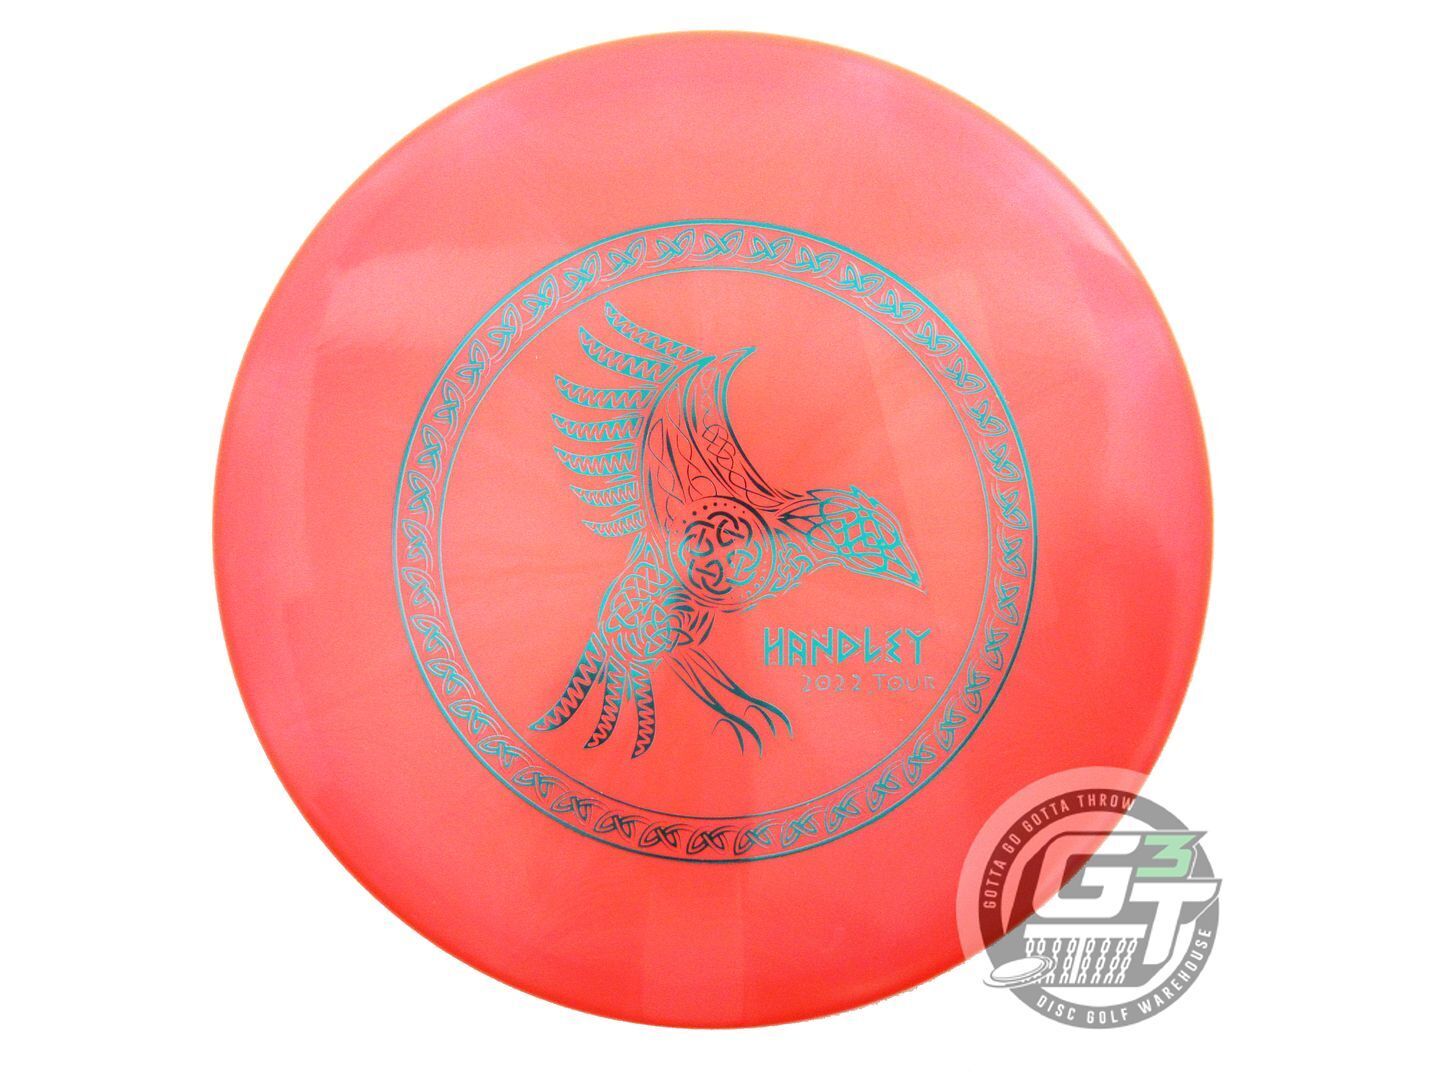 Dynamic Discs Limited Edition 2022 Team Series Holyn Handley Chameleon Lucid Suspect Midrange Golf Disc (Individually Listed)